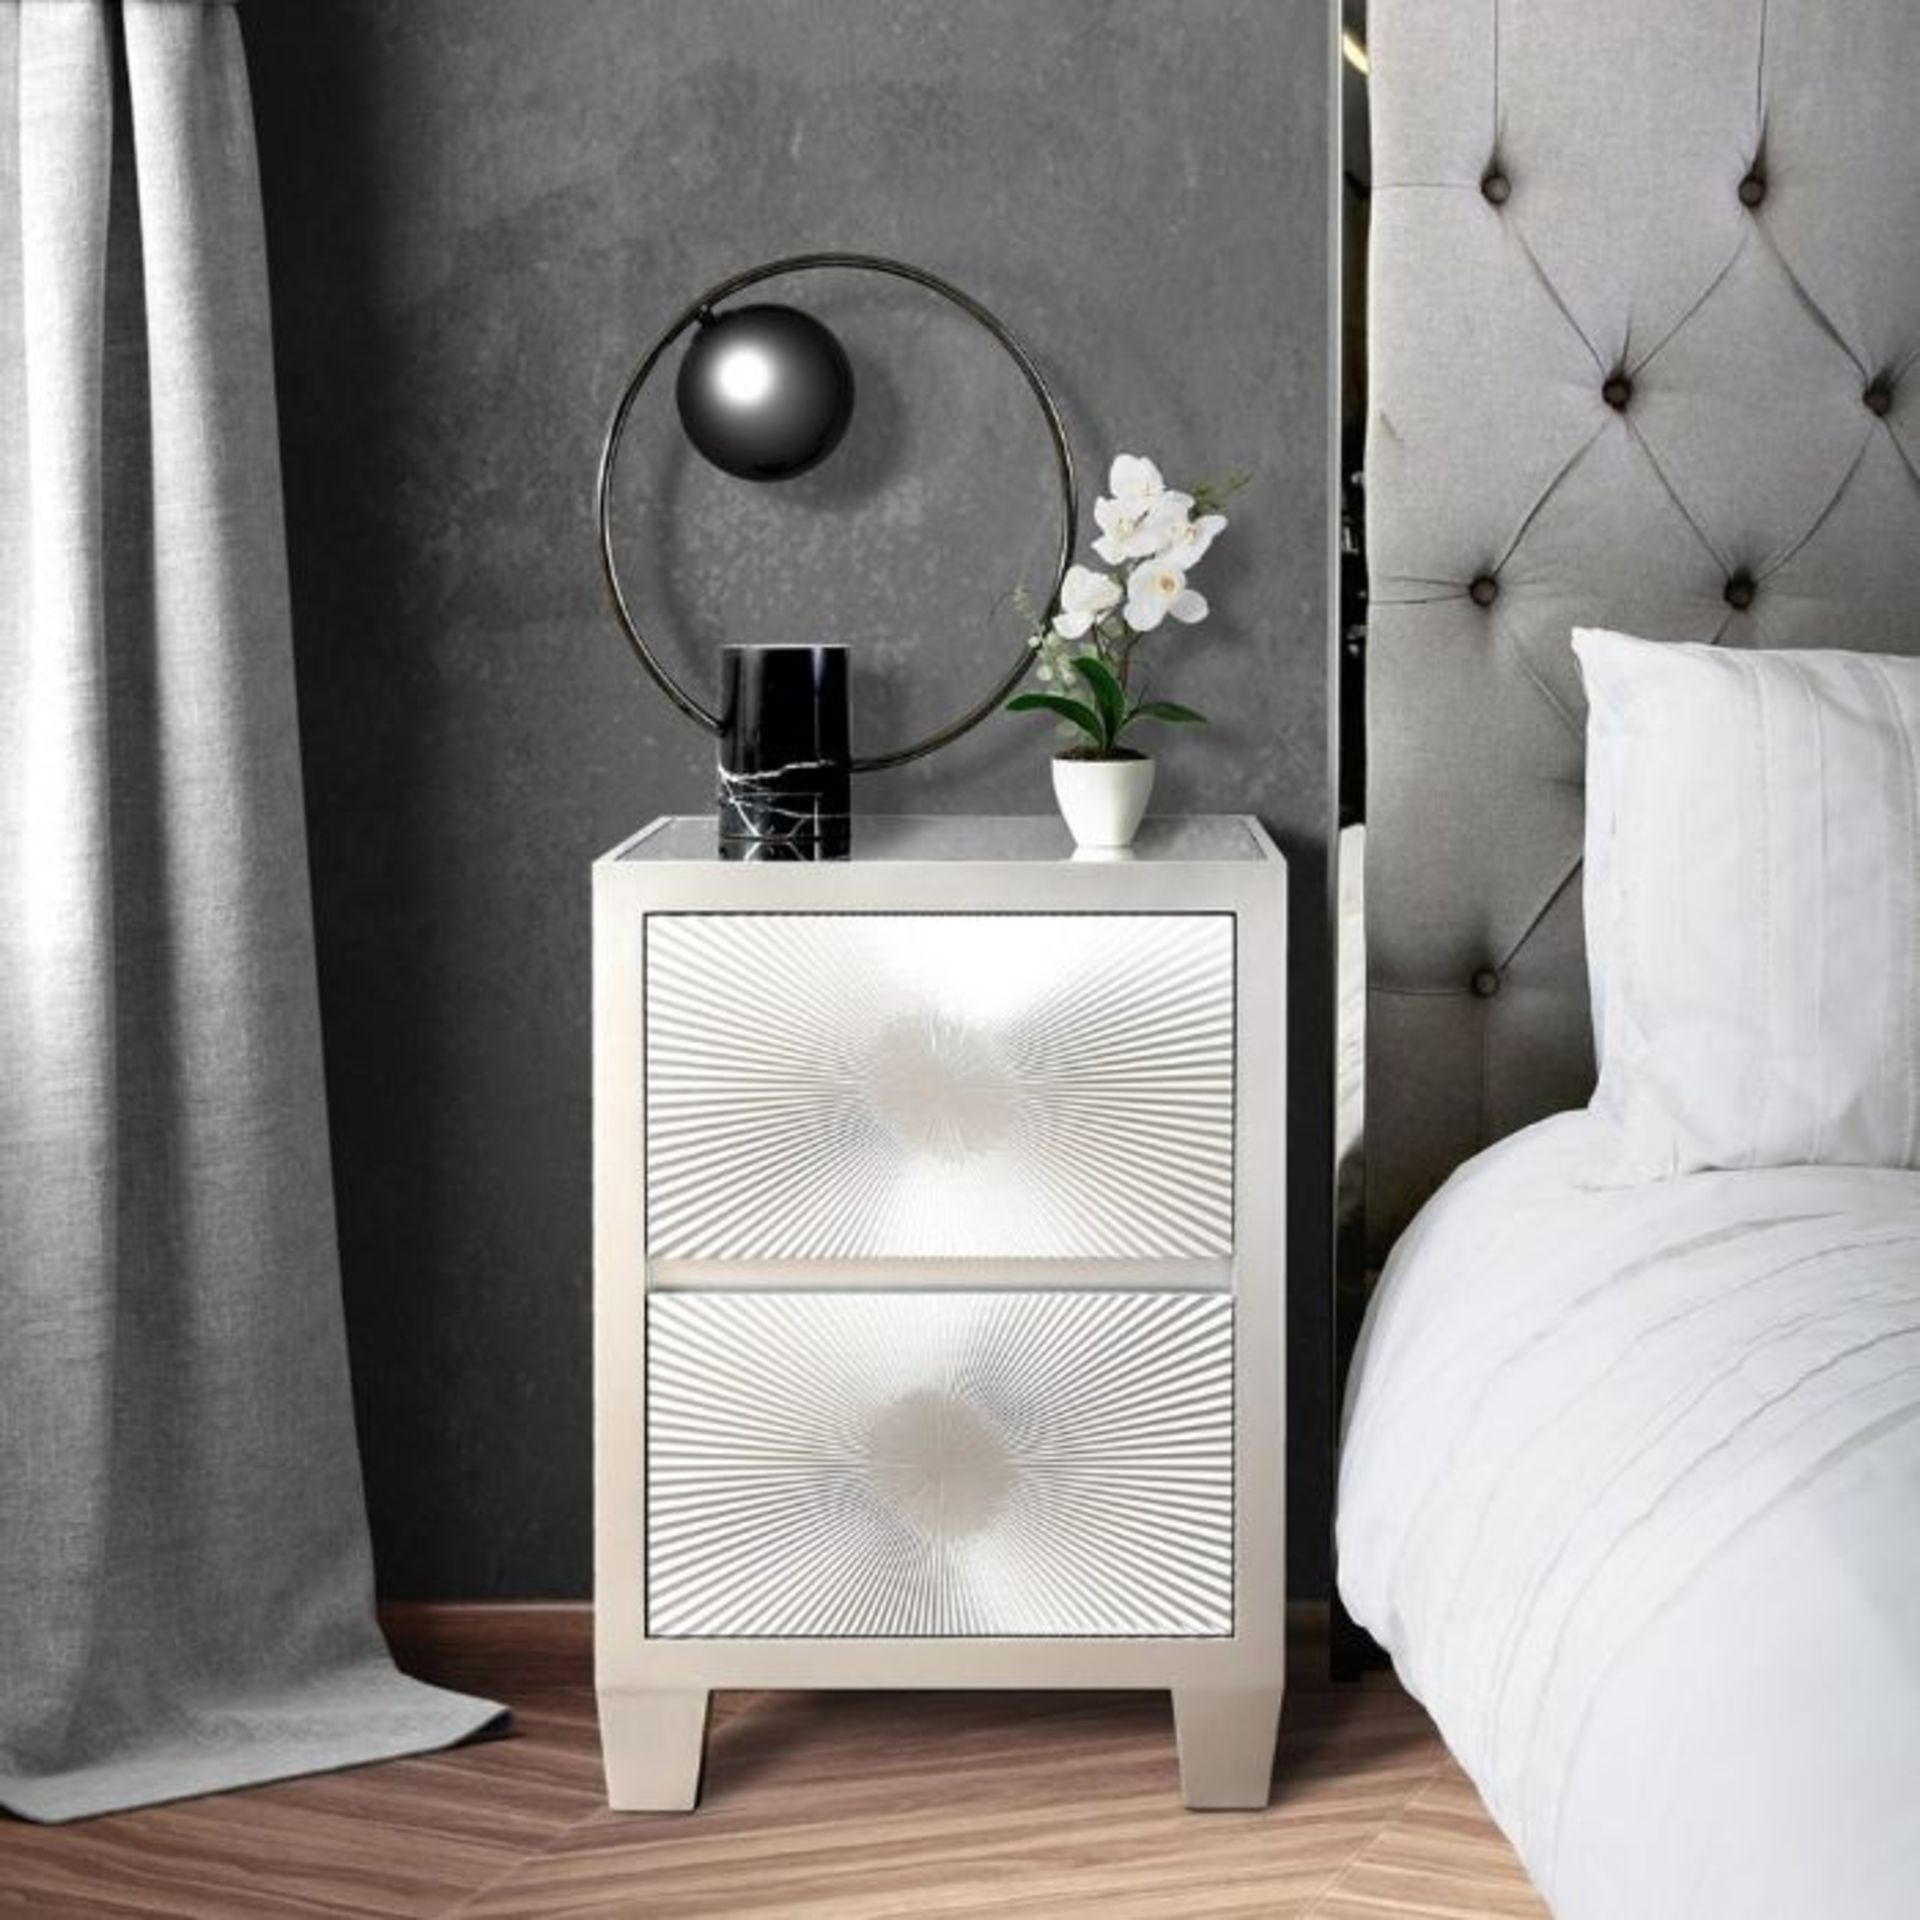 Rowen Group Henley Silver Sunburst Two Drawer Bedside Table - RRP £254 SKU ROW-APG-WF268-00-SV-BC59 - Image 7 of 12